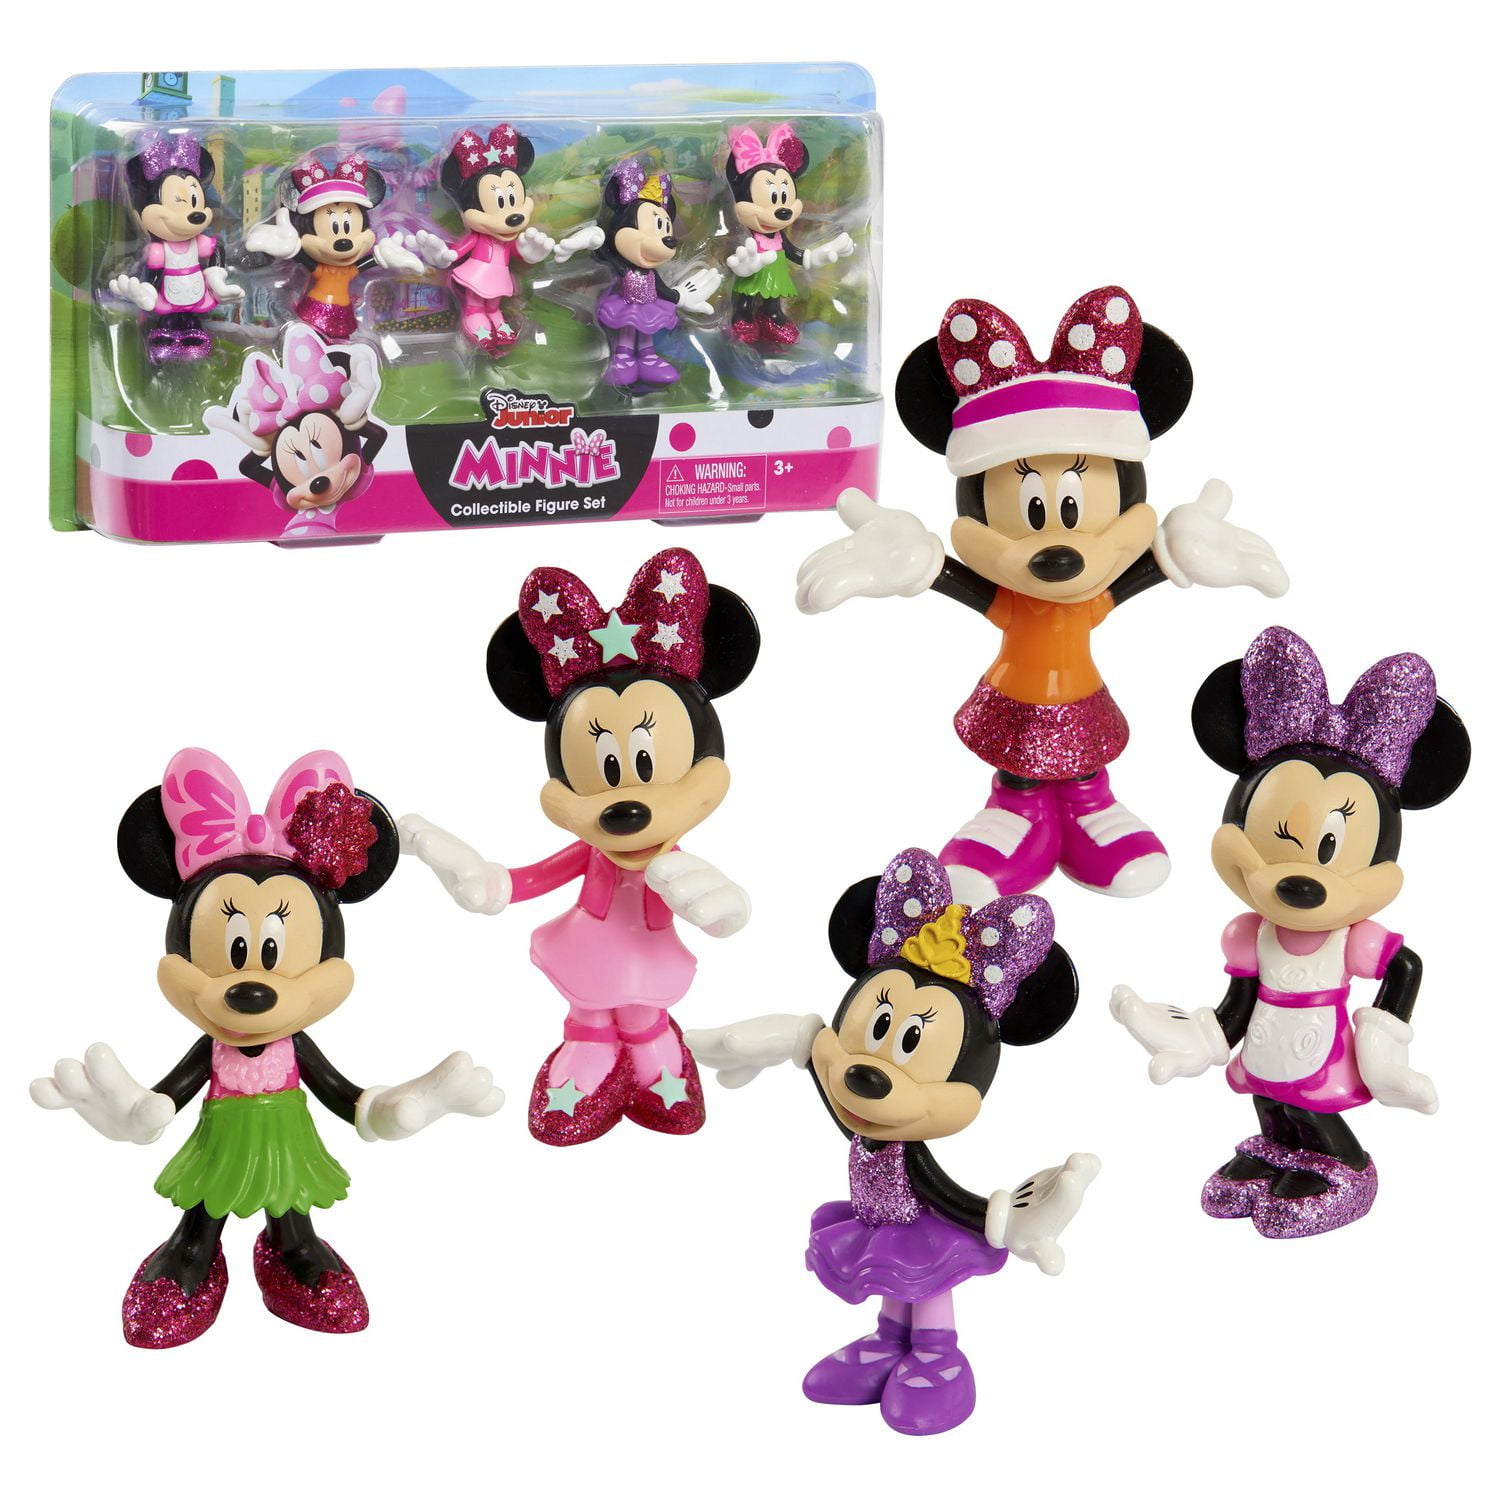 Just Play Disney Junior Minnie Mouse 3 inch Tall Collectible Figure Set, 5  Piece Set Includes Tennis, Hula, Candy Maker, Popstar, and Ballerina  Outfits, Kids Toys for Ages 3 up, Disney Junior